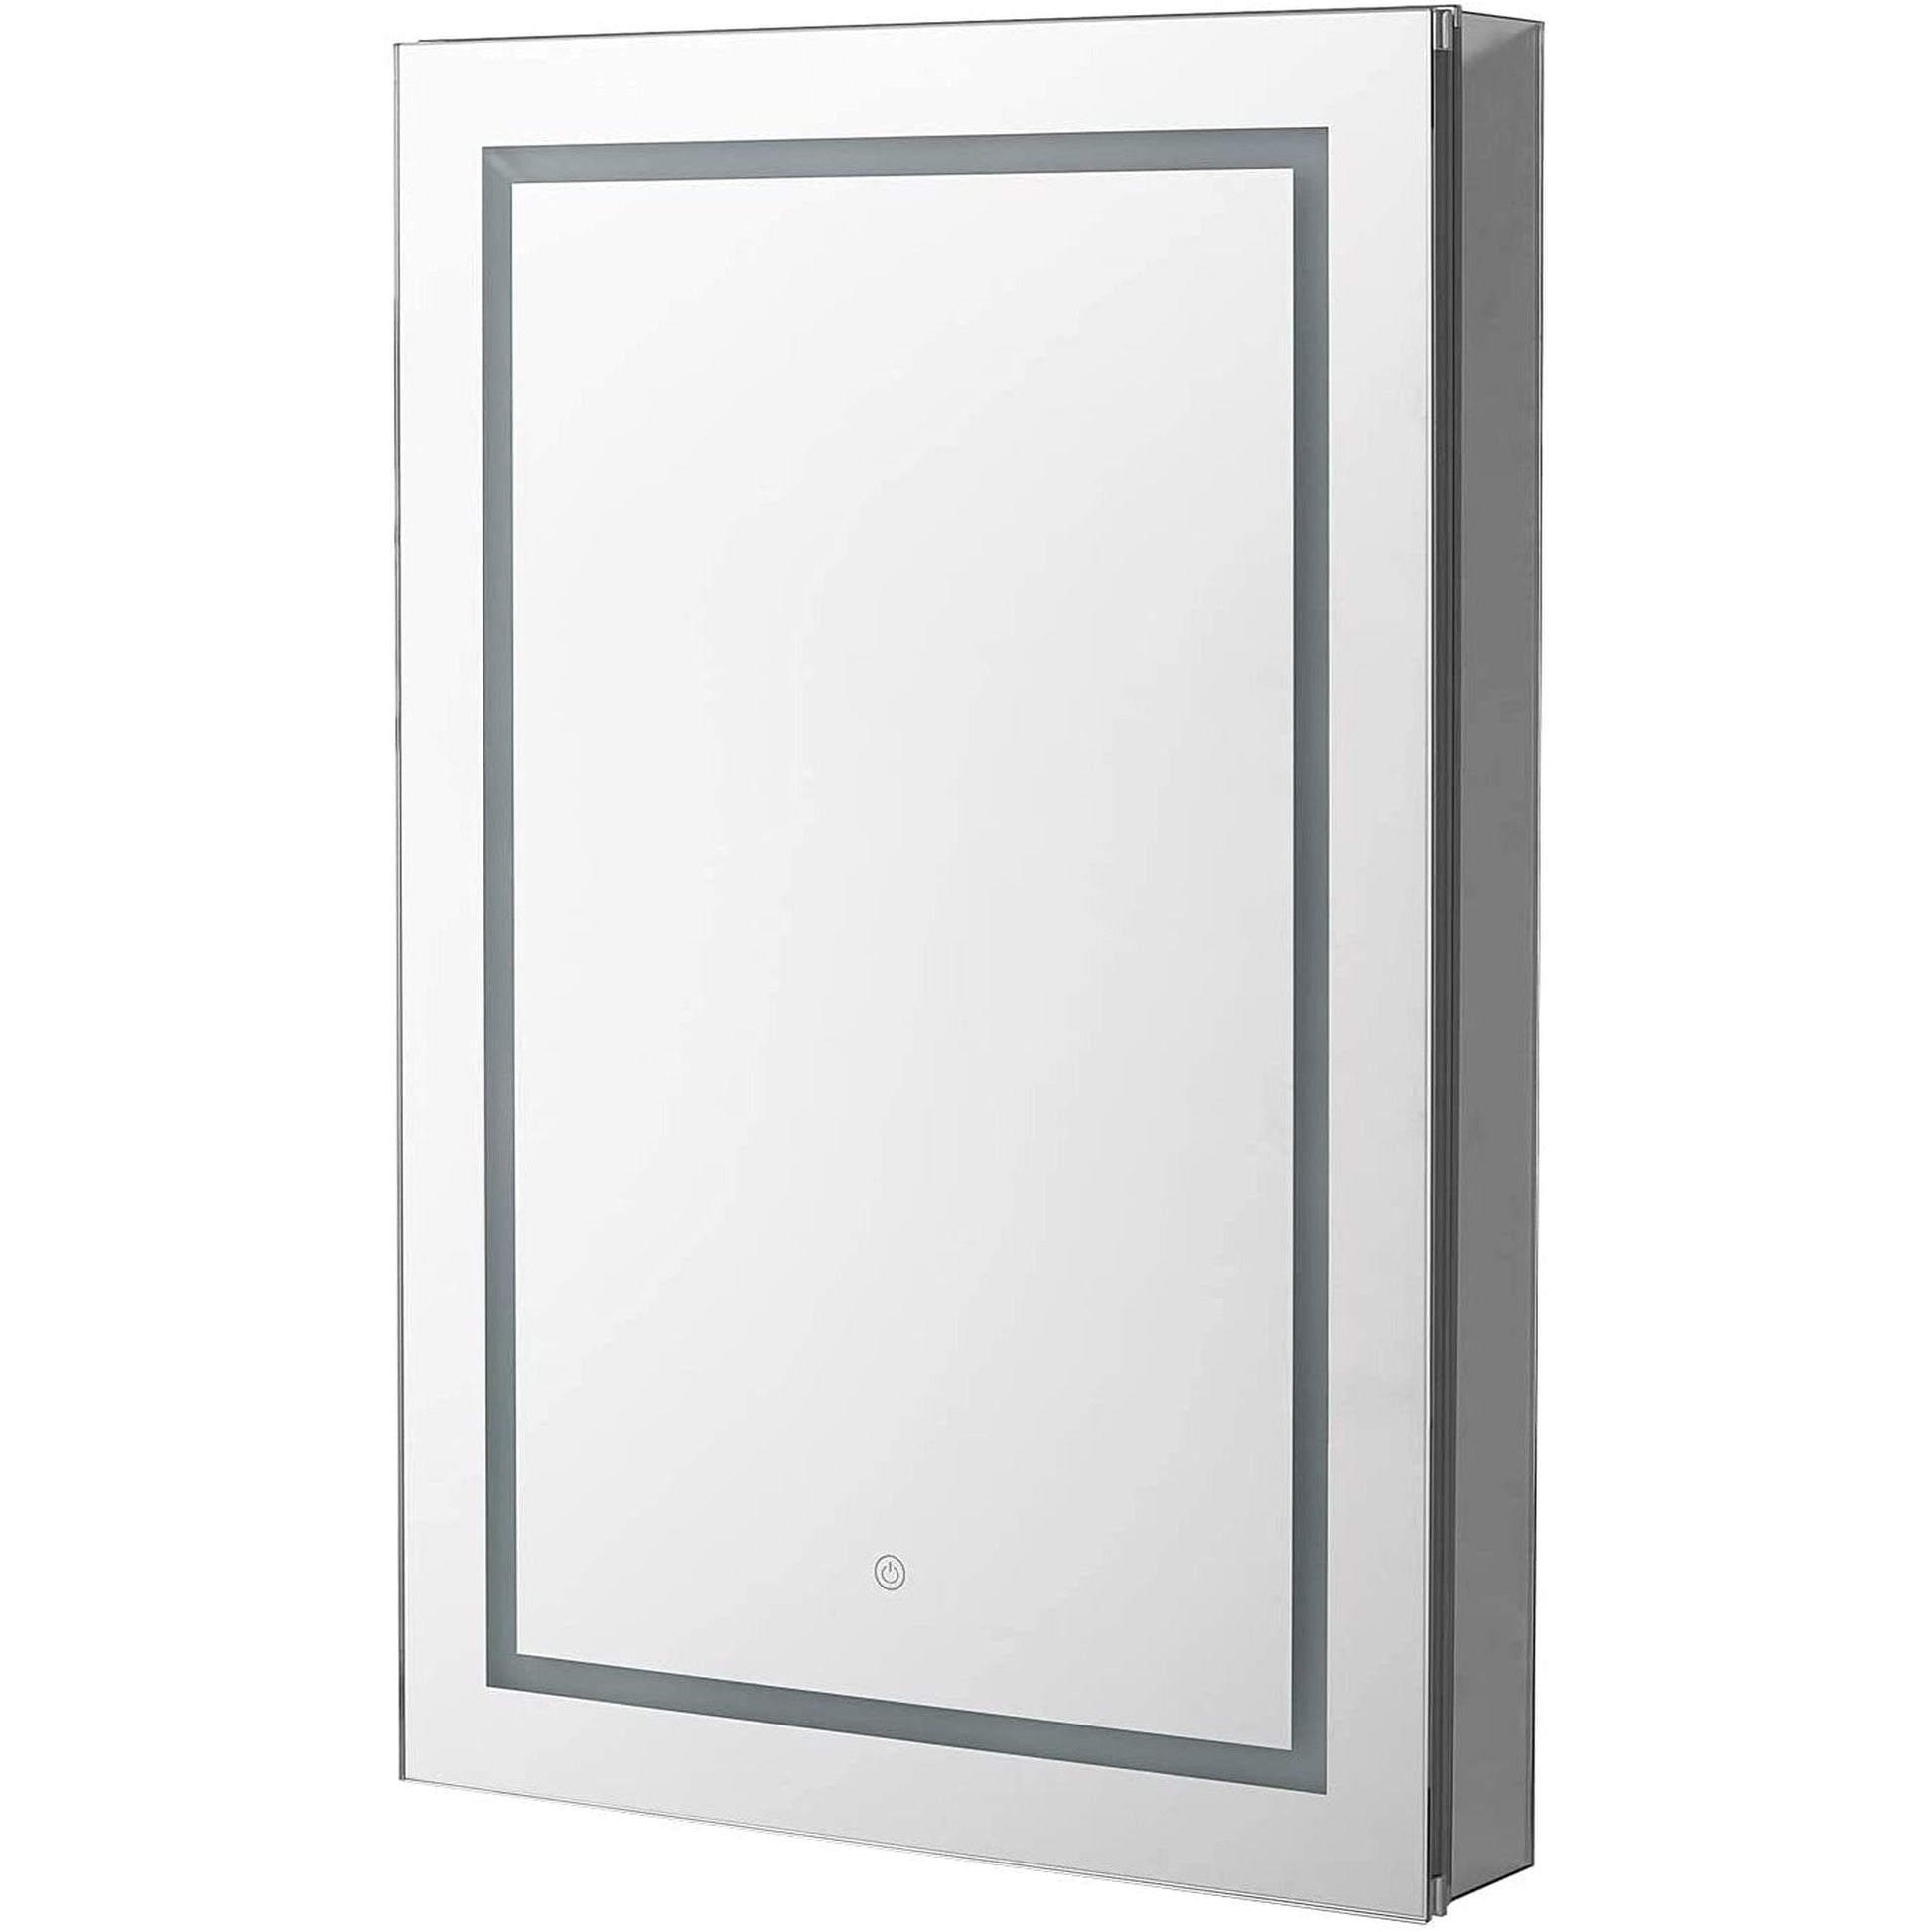 Aquadom Royale Plus 24" x 36" Rectangle Recessed or Surface Mount Single View Right Hinged LED Lighted Bathroom Medicine Cabinet With Defogger, Electrical Outlet, Magnifying Mirror